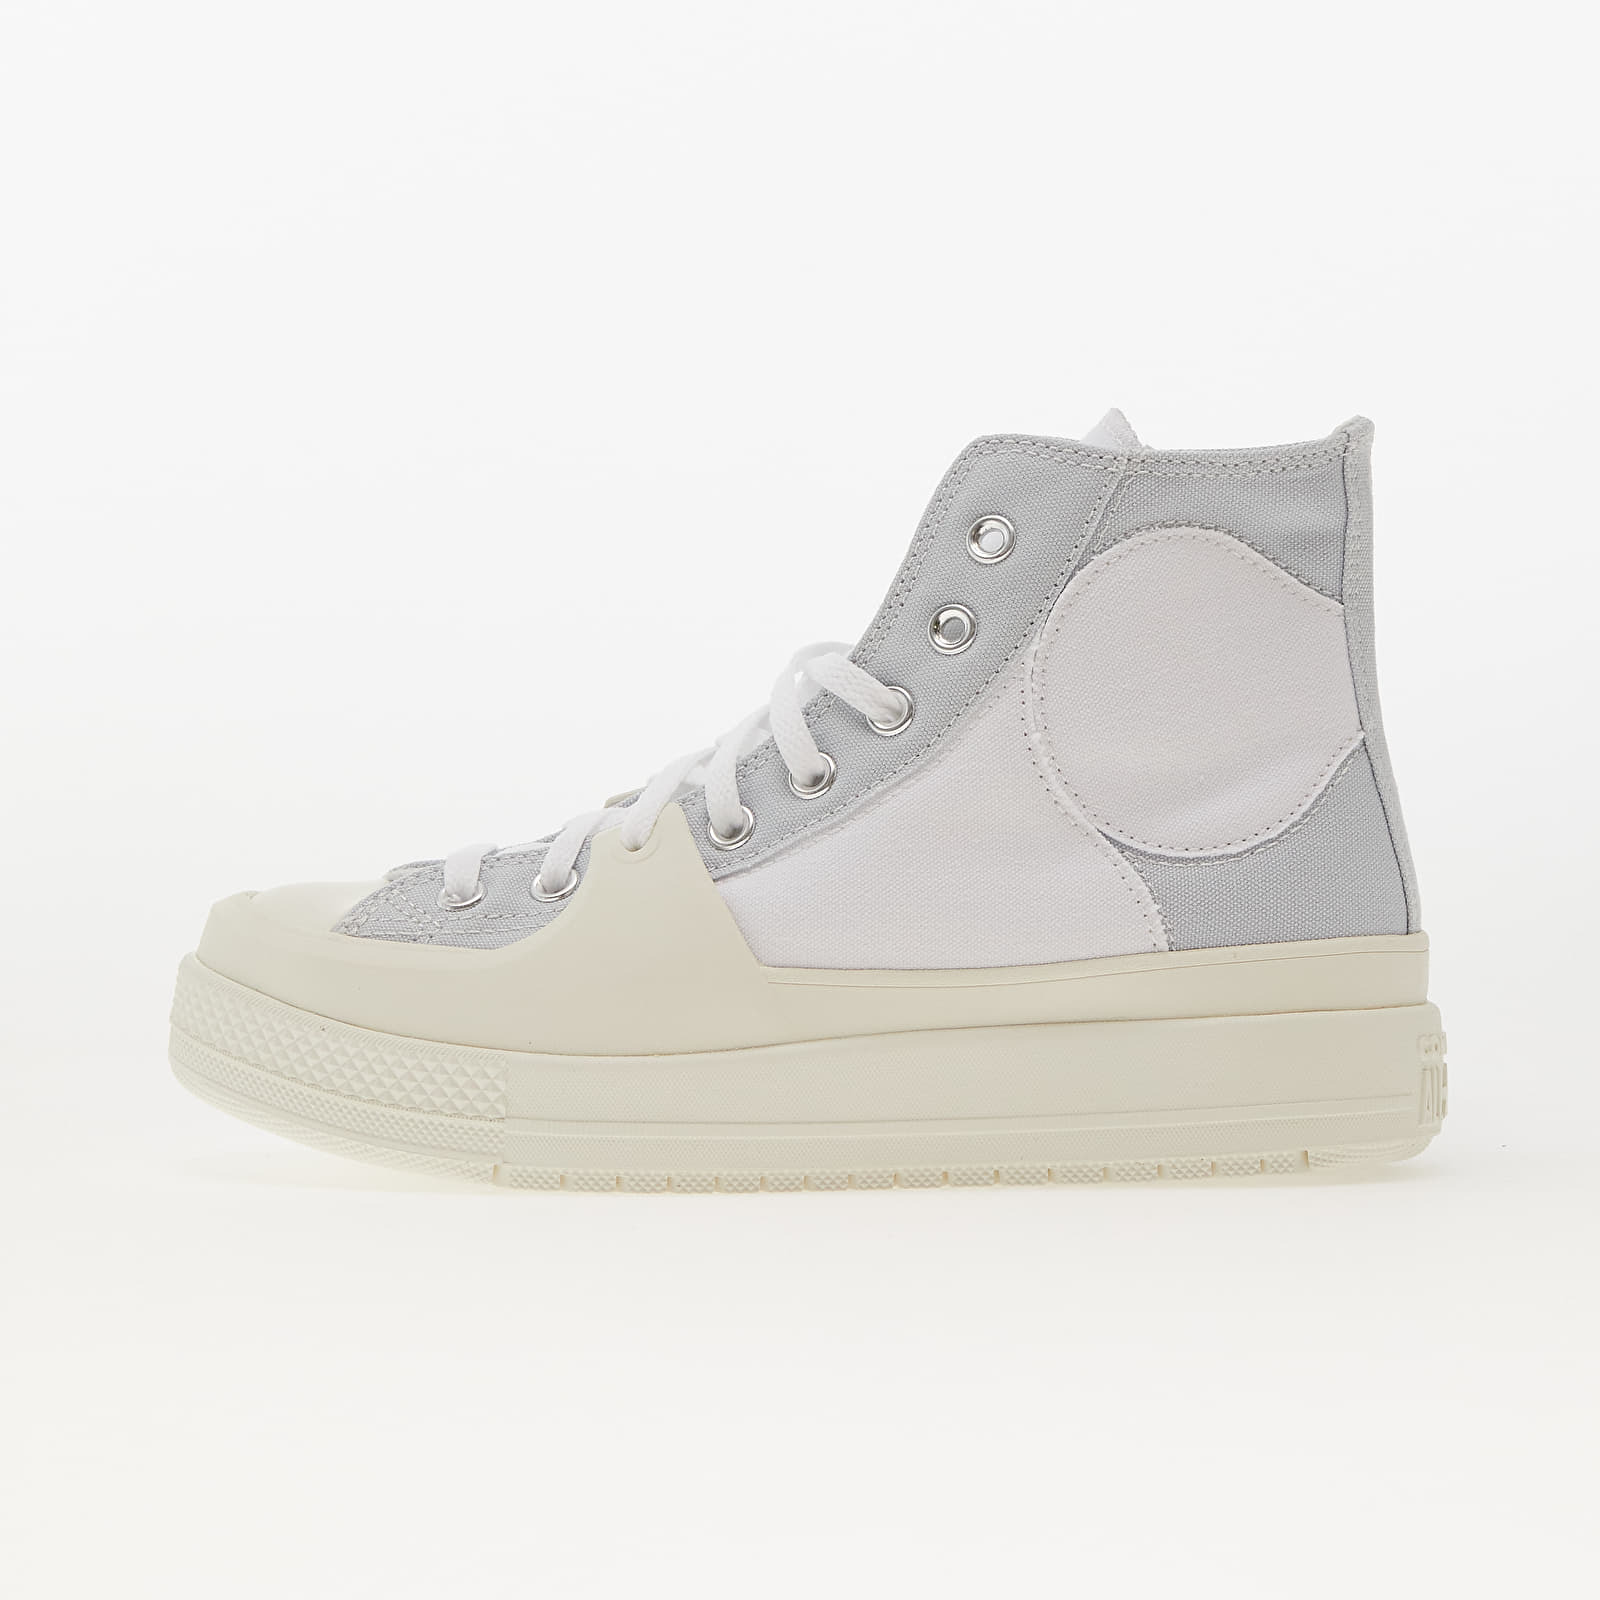 Converse - chuck taylor all star construct summer tone white/ ghosted/ black